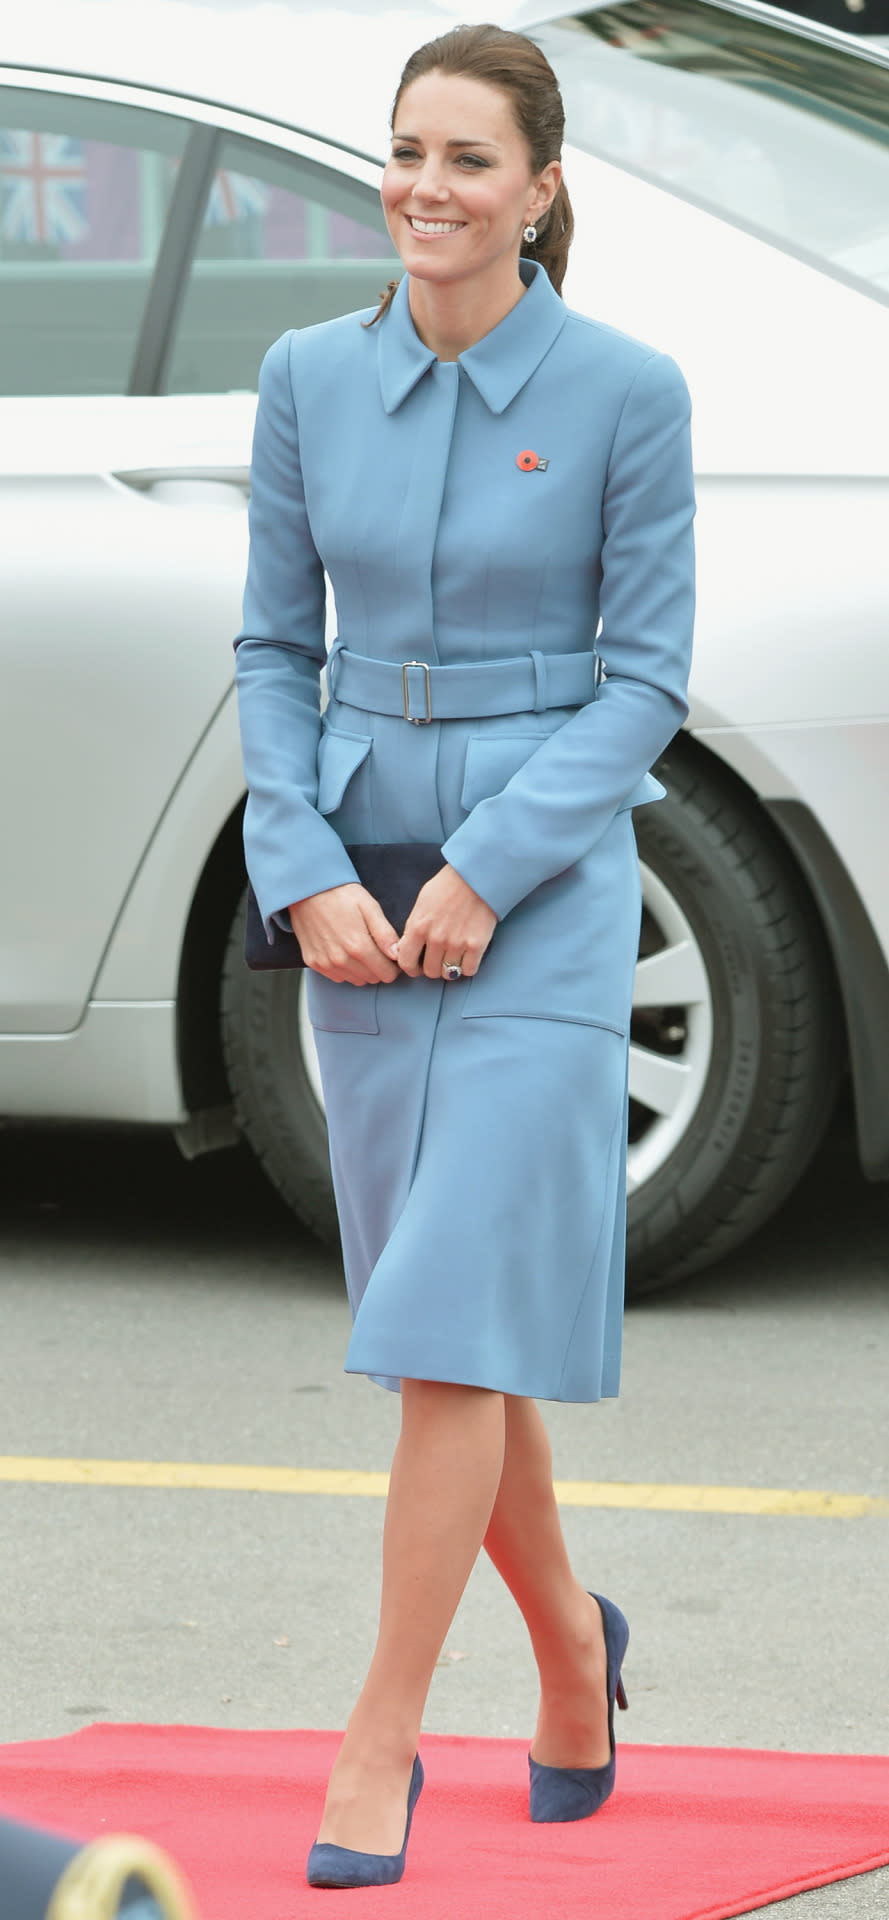 <p>Kate visited a war memorial in New Zealand wearing a blue customised coat dress by Alexander McQueen. A suede Stuart Weitzman bag and navy shoes completed the sleek look. </p><p><i>[Photo: PA]</i></p>